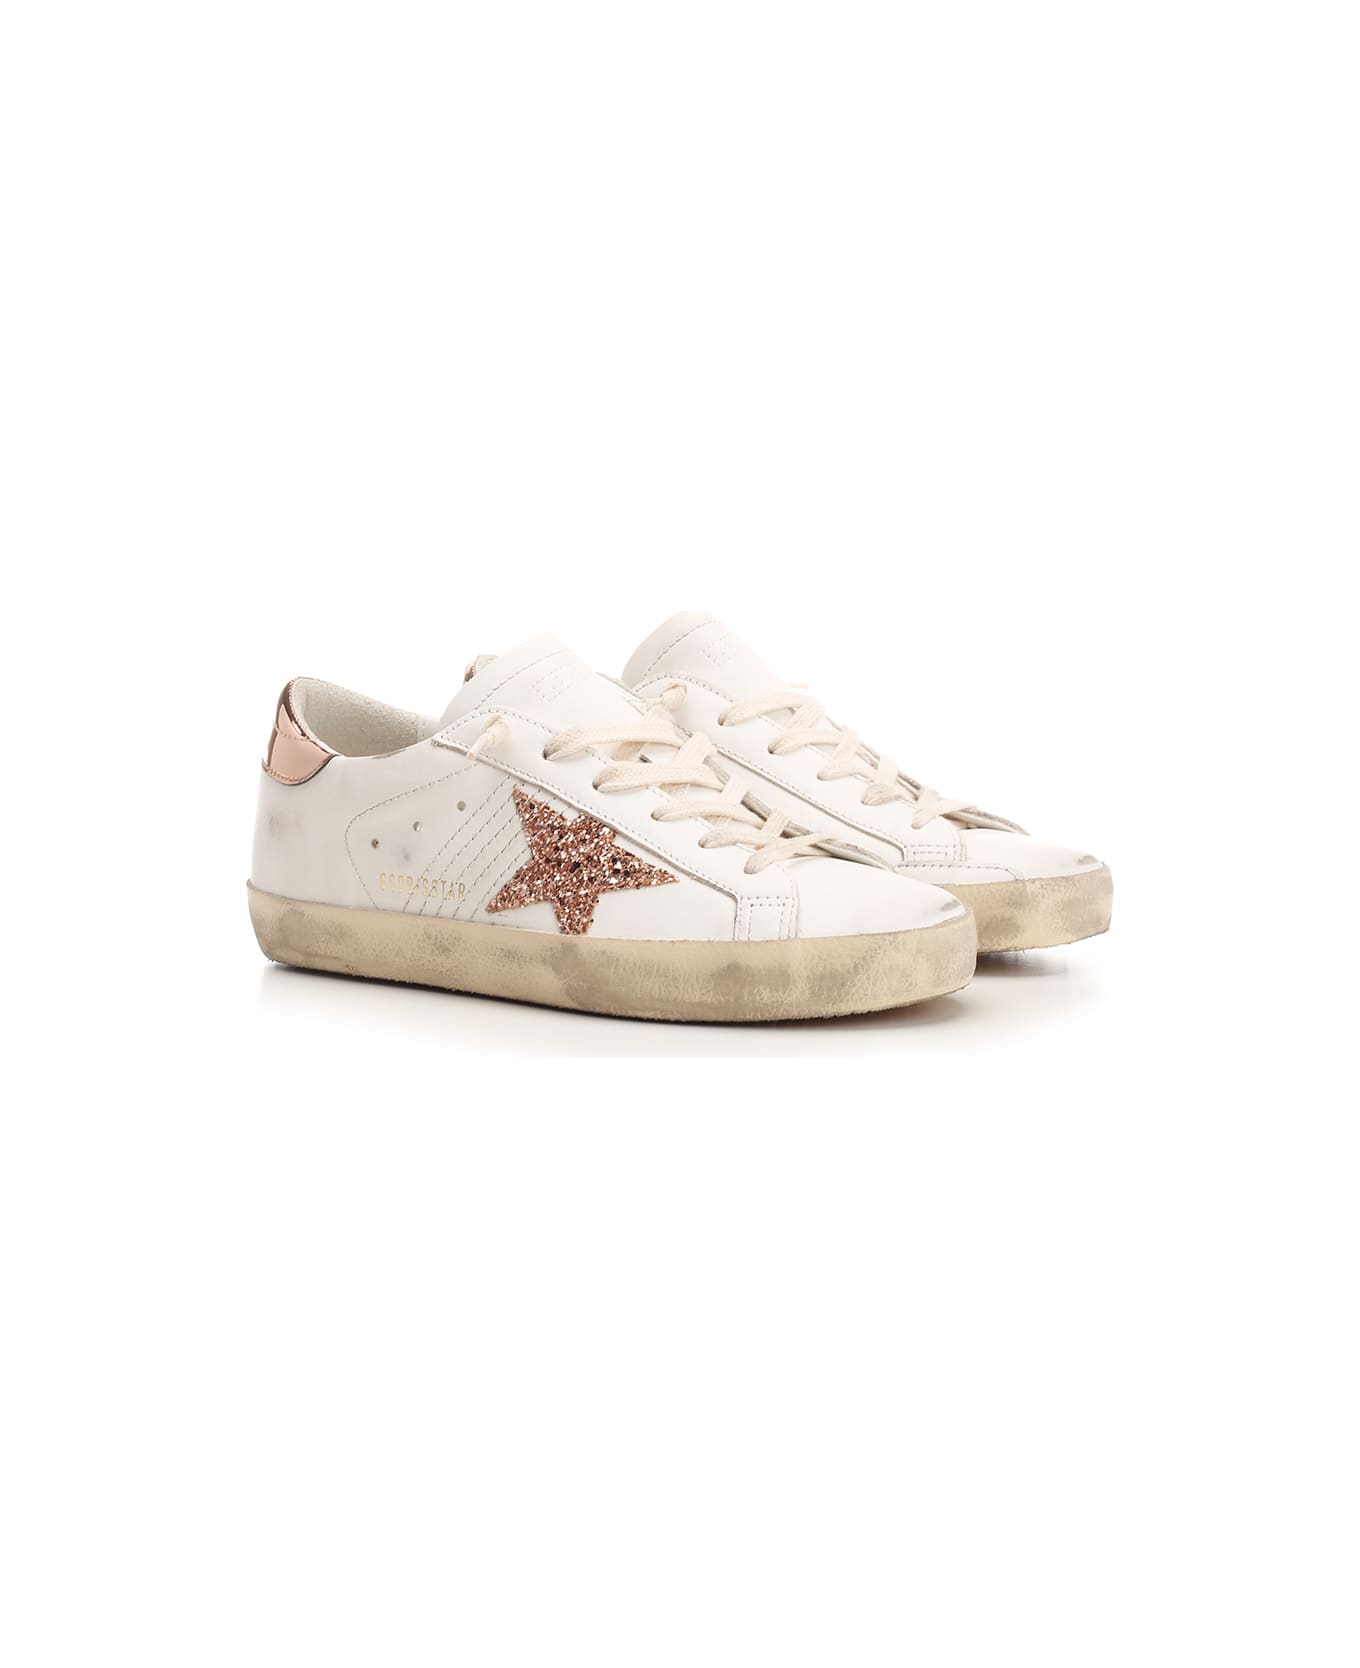 Golden Goose Superstar Classic Sneakers - WHITE/PEACH PINK/ANTIQUE ROSE スニーカー